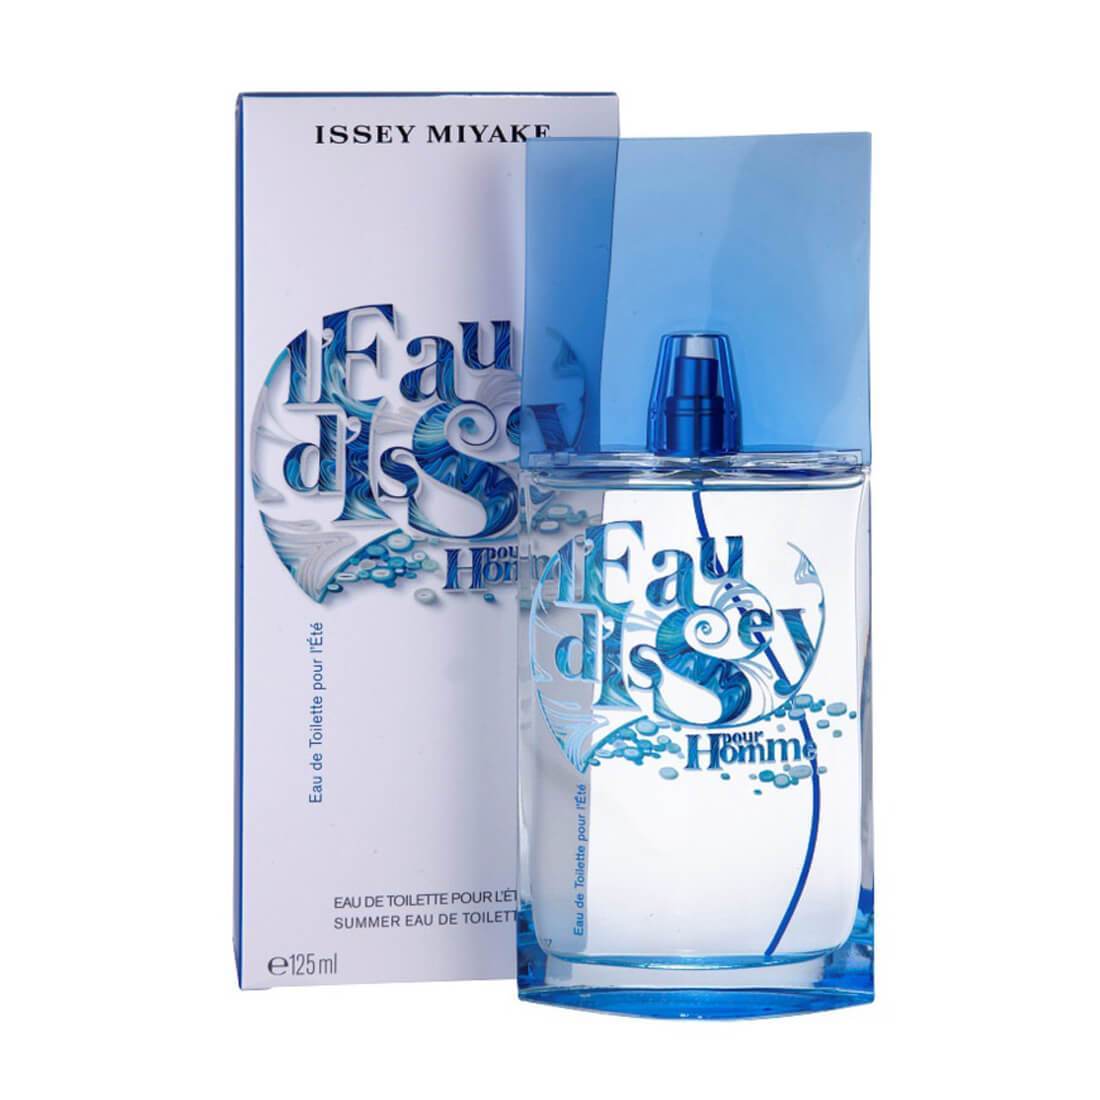 Issey Miyake Summer 2015 Pour L'Ete Edt Perfume For Men - 125Ml